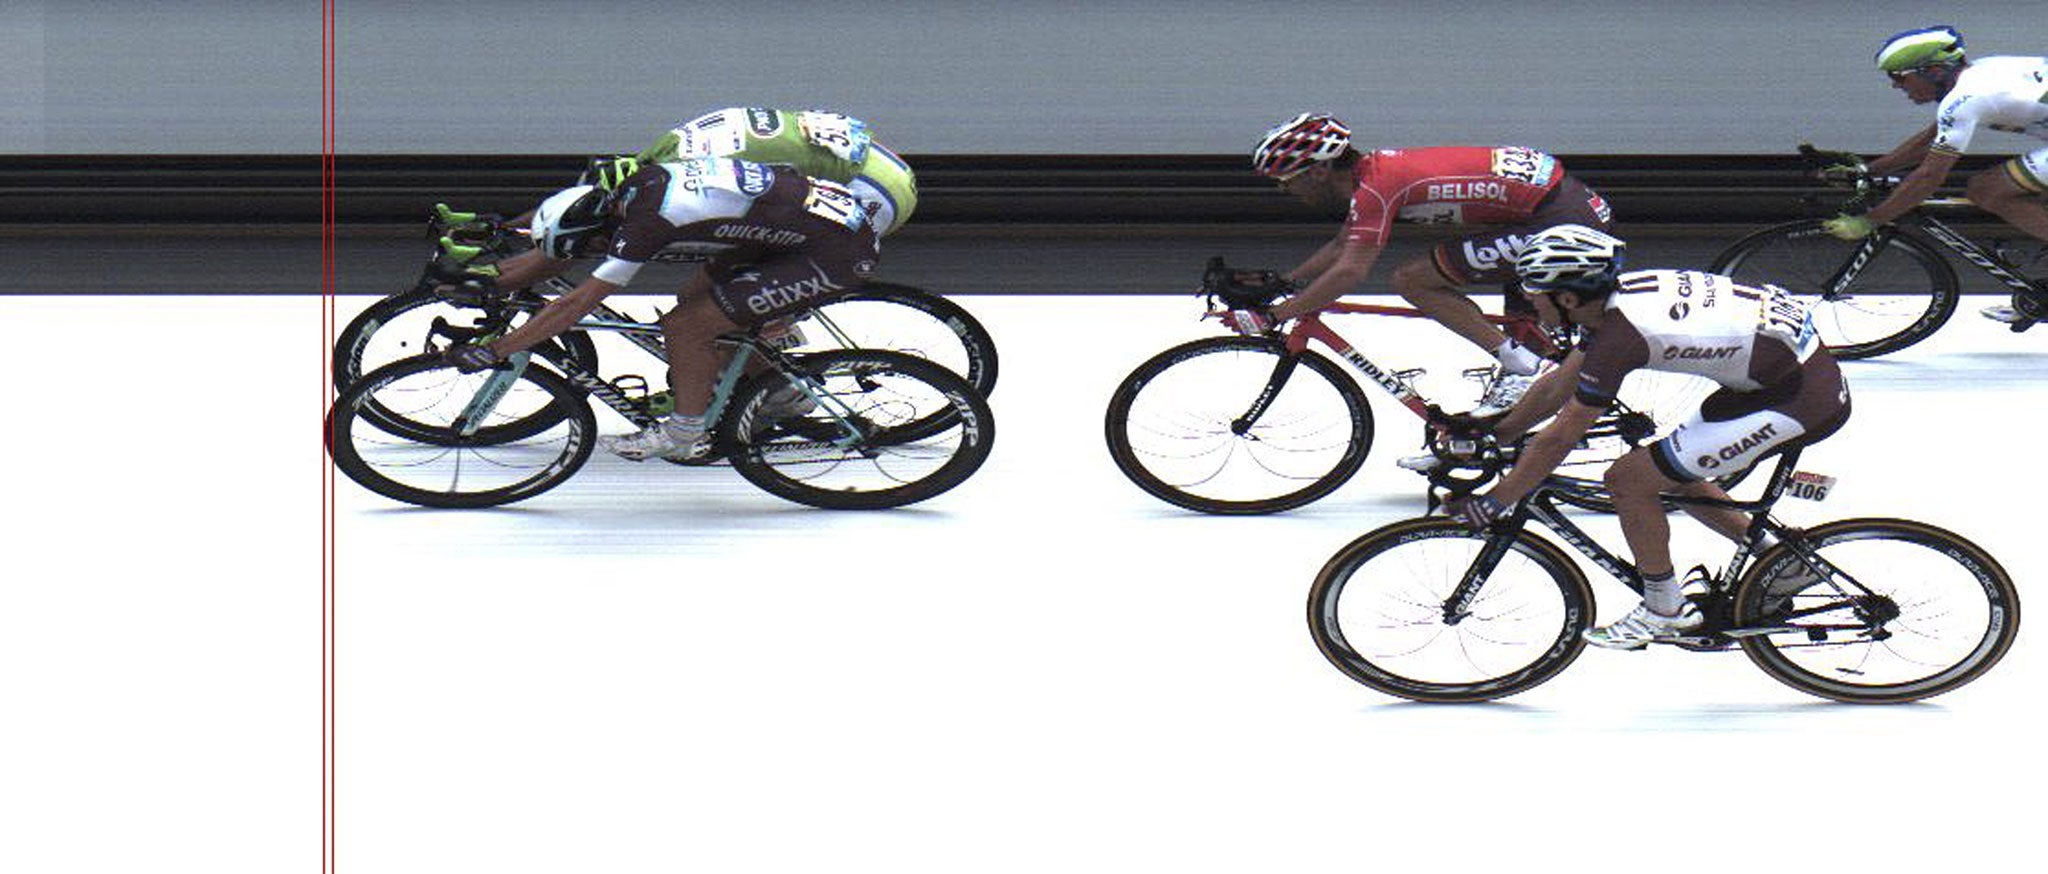 In this photo finish image, Italy’s Matteo Trentin (front left) crosses the finish line ahead of second-placed Peter
Sagan, of Slovakia (left rear). France’s Tony Gallop in red is third, and Netherlands’ Tom Dumoulin in white, fourth